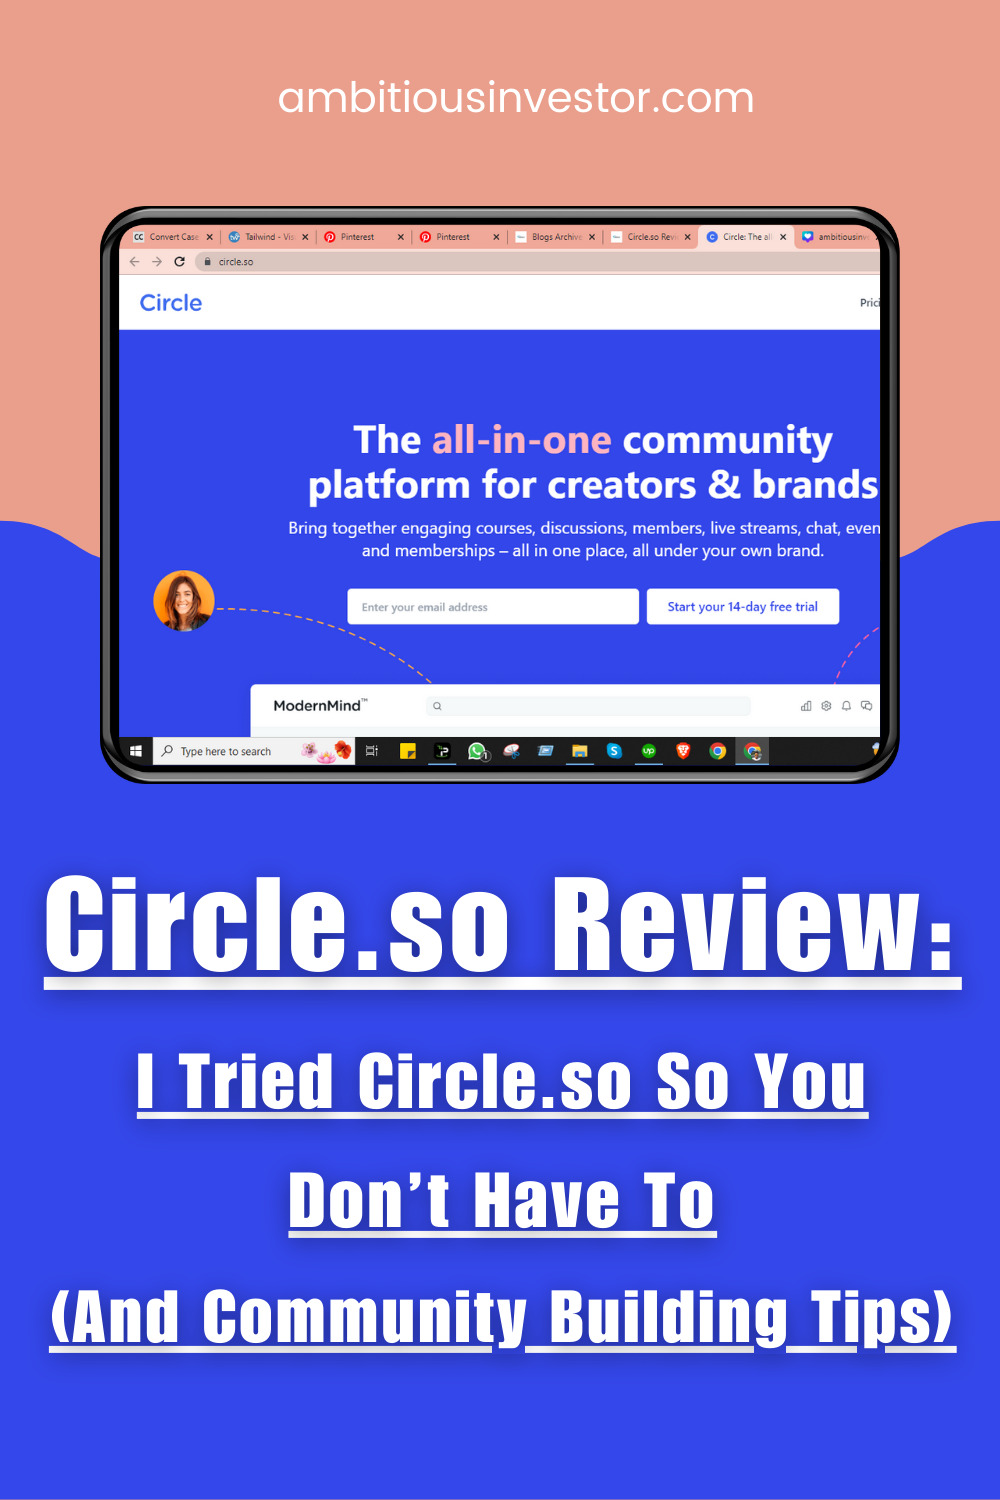 Circle.so Review: I Tried Circle.so So You Don’t Have To (And Community Building Tips)